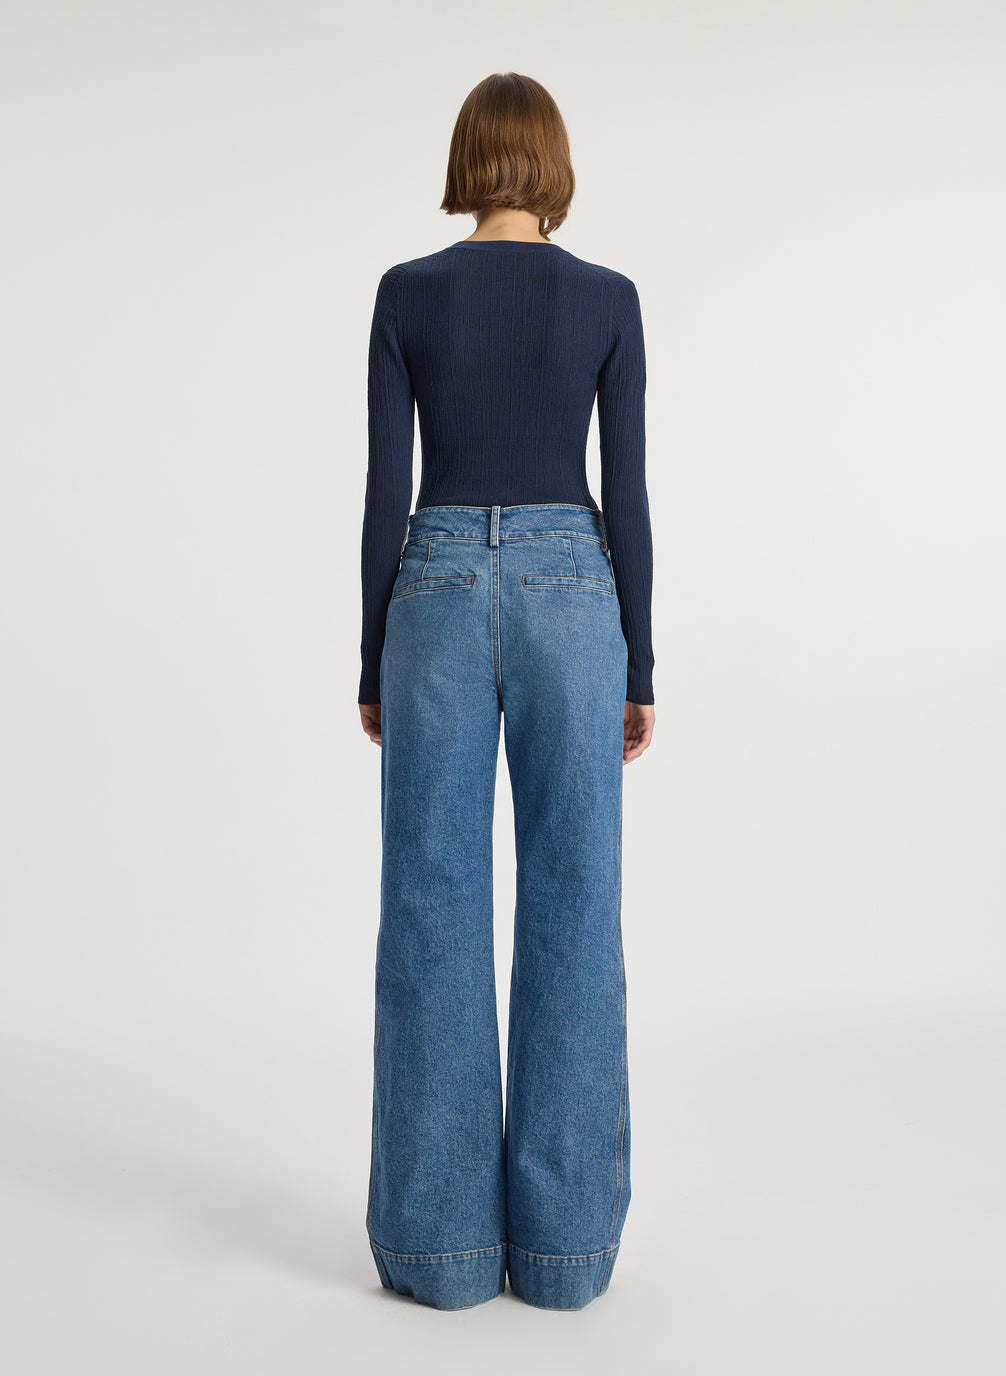 back view of woman wearing navy blue cardigan and medium blue wash wide leg denim jeans